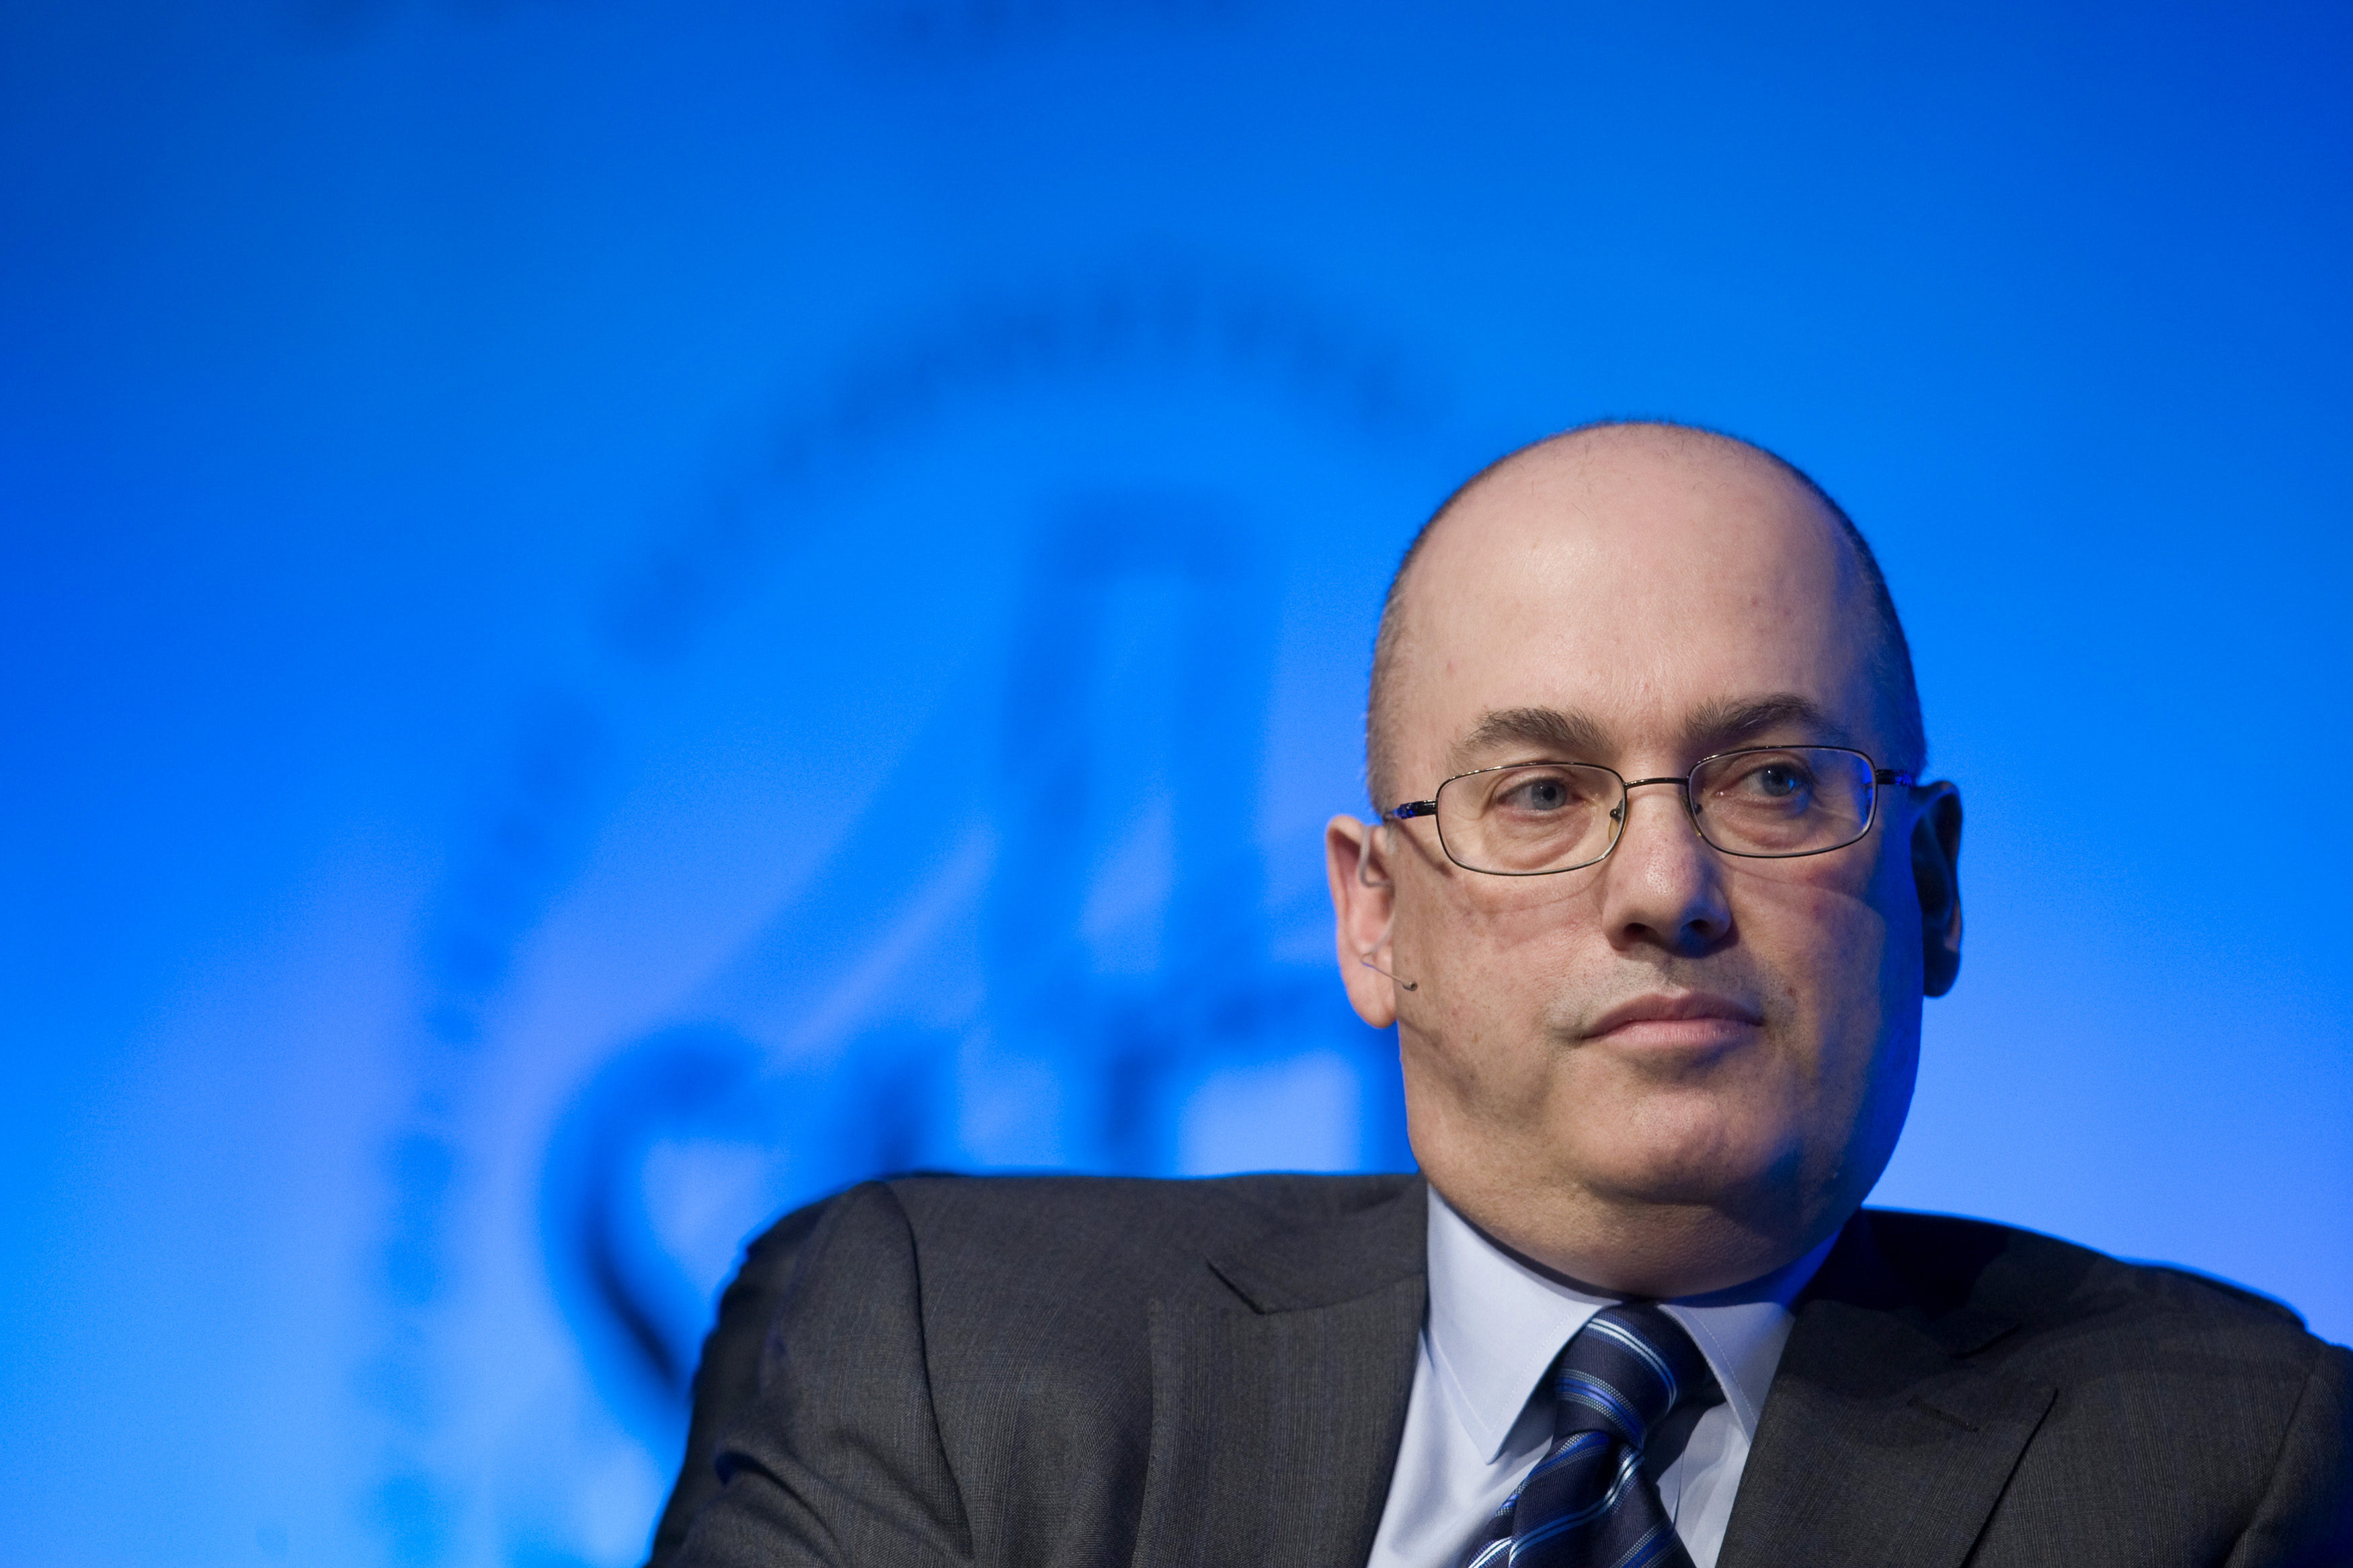 Hedge fund manager Steven A. Cohen, founder and chairman of SAC Capital Advisors, listens to a question during a one-on-one interview session at the SkyBridge Alternatives (SALT) Conference in Las Vegas, Nevada May 11, 2011. (Steve Marcus / REUTERS)